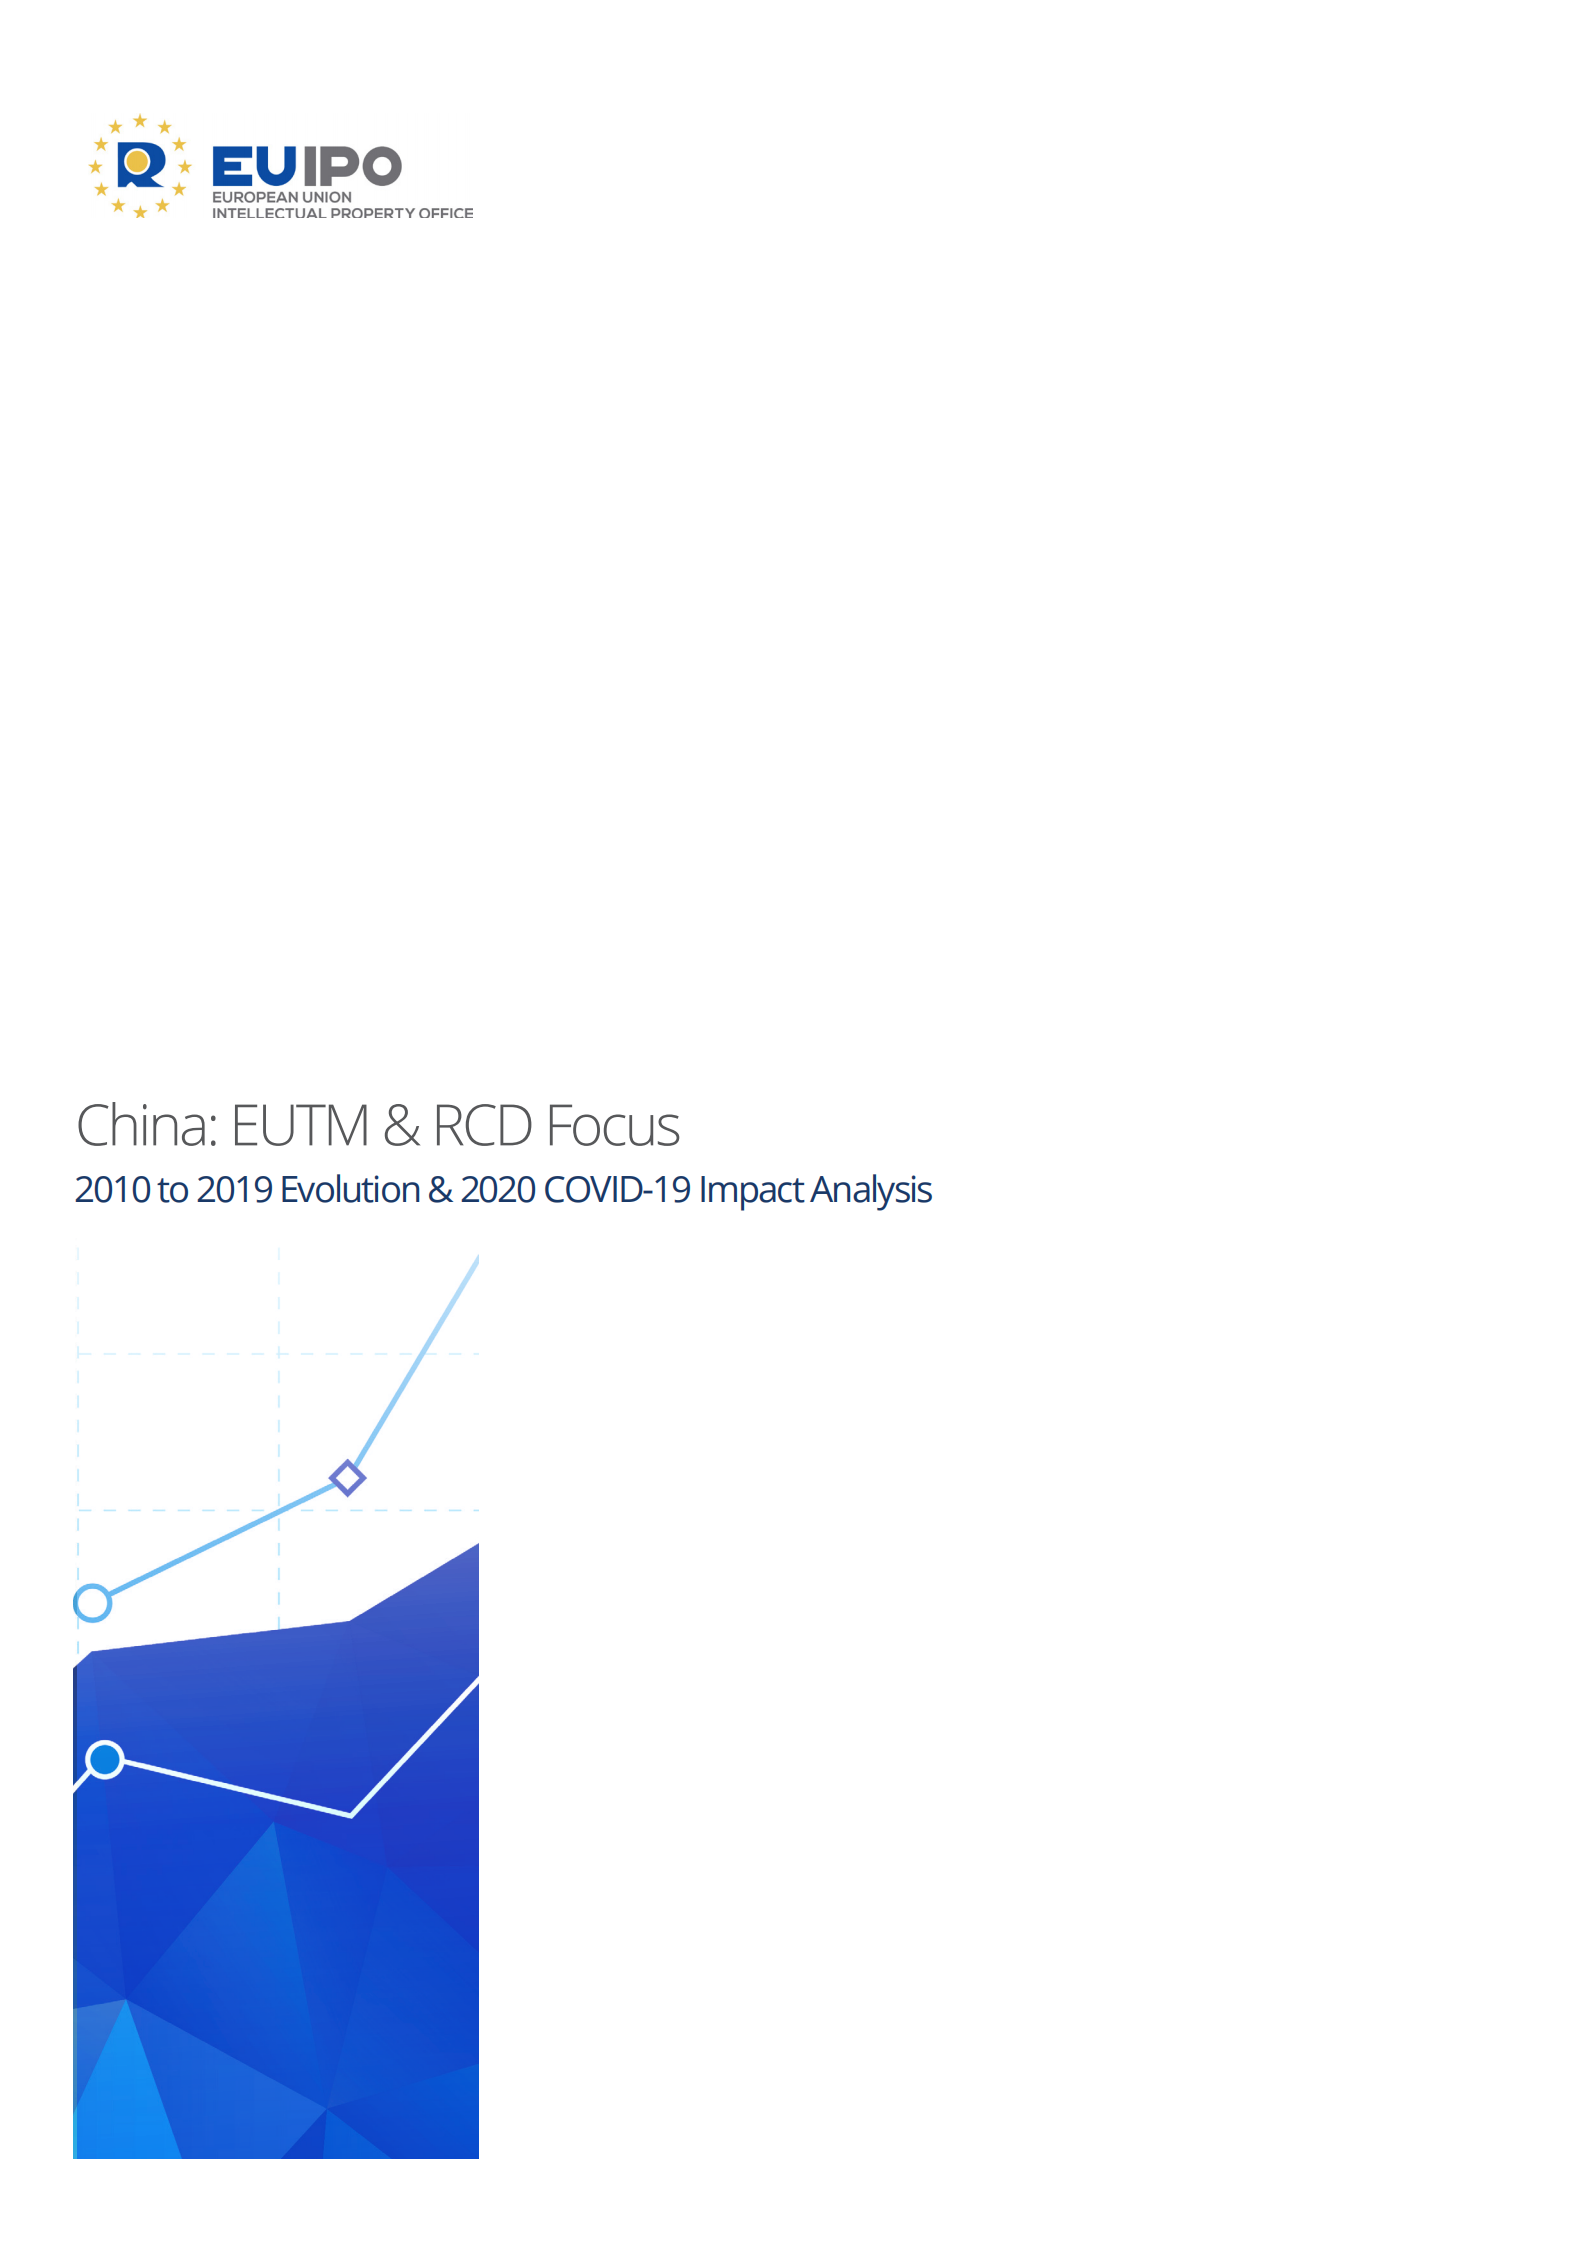 China-EUTM-RCD_2010-2019_Evolution-2020_COVID-19_Impact_Analysis_51.png